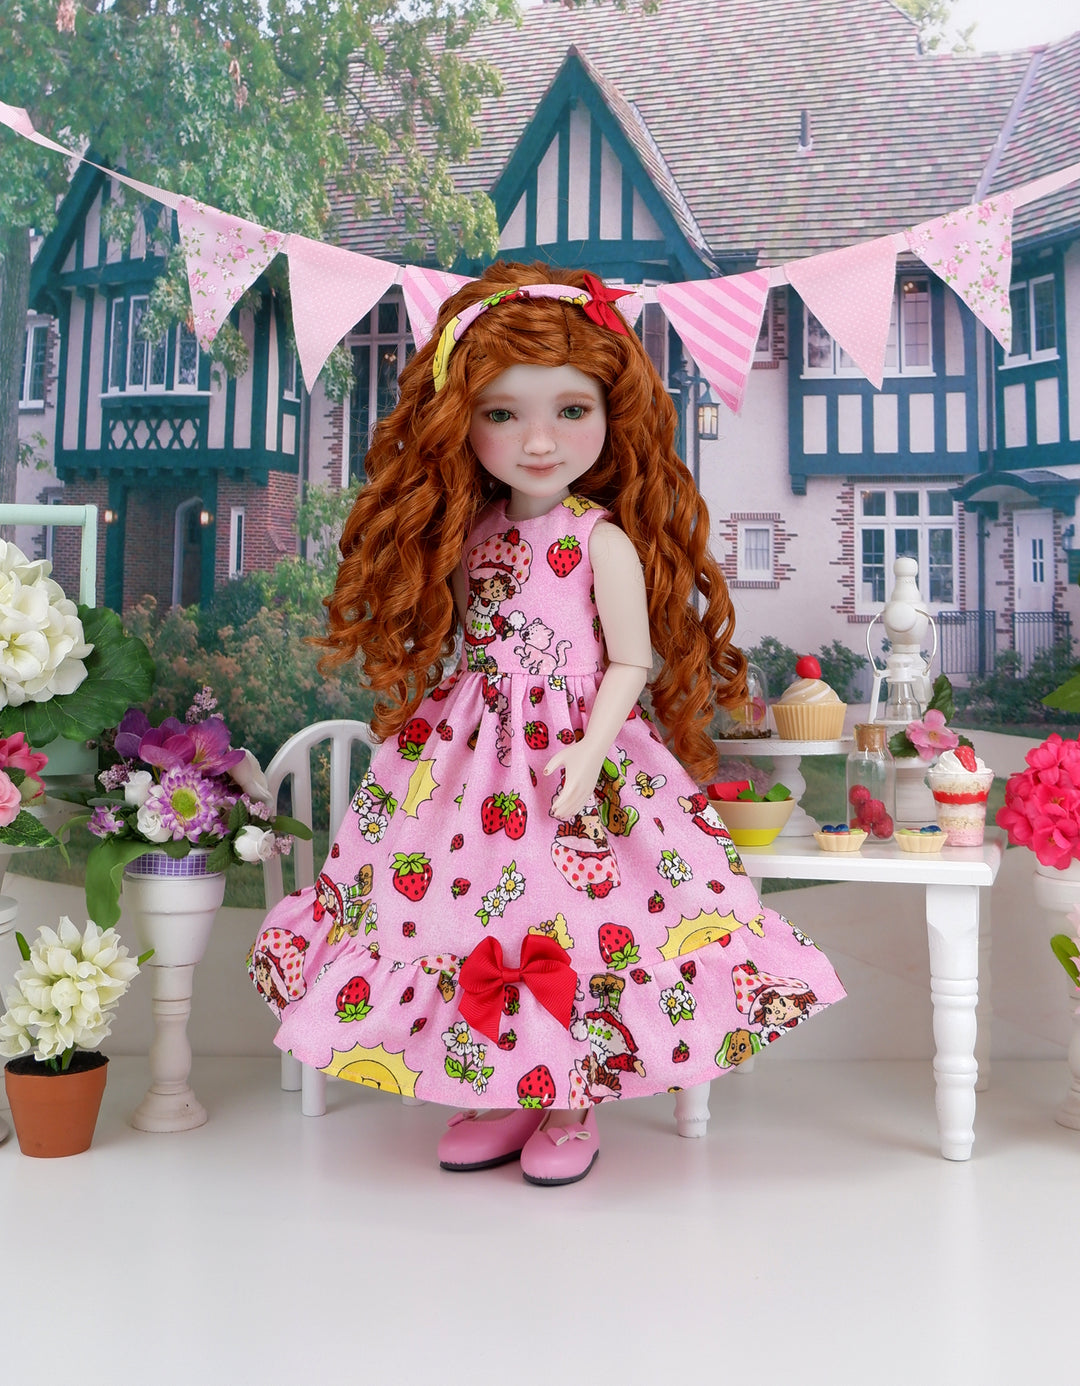 Shortcake & Custard - dress with shoes for Ruby Red Fashion Friends doll